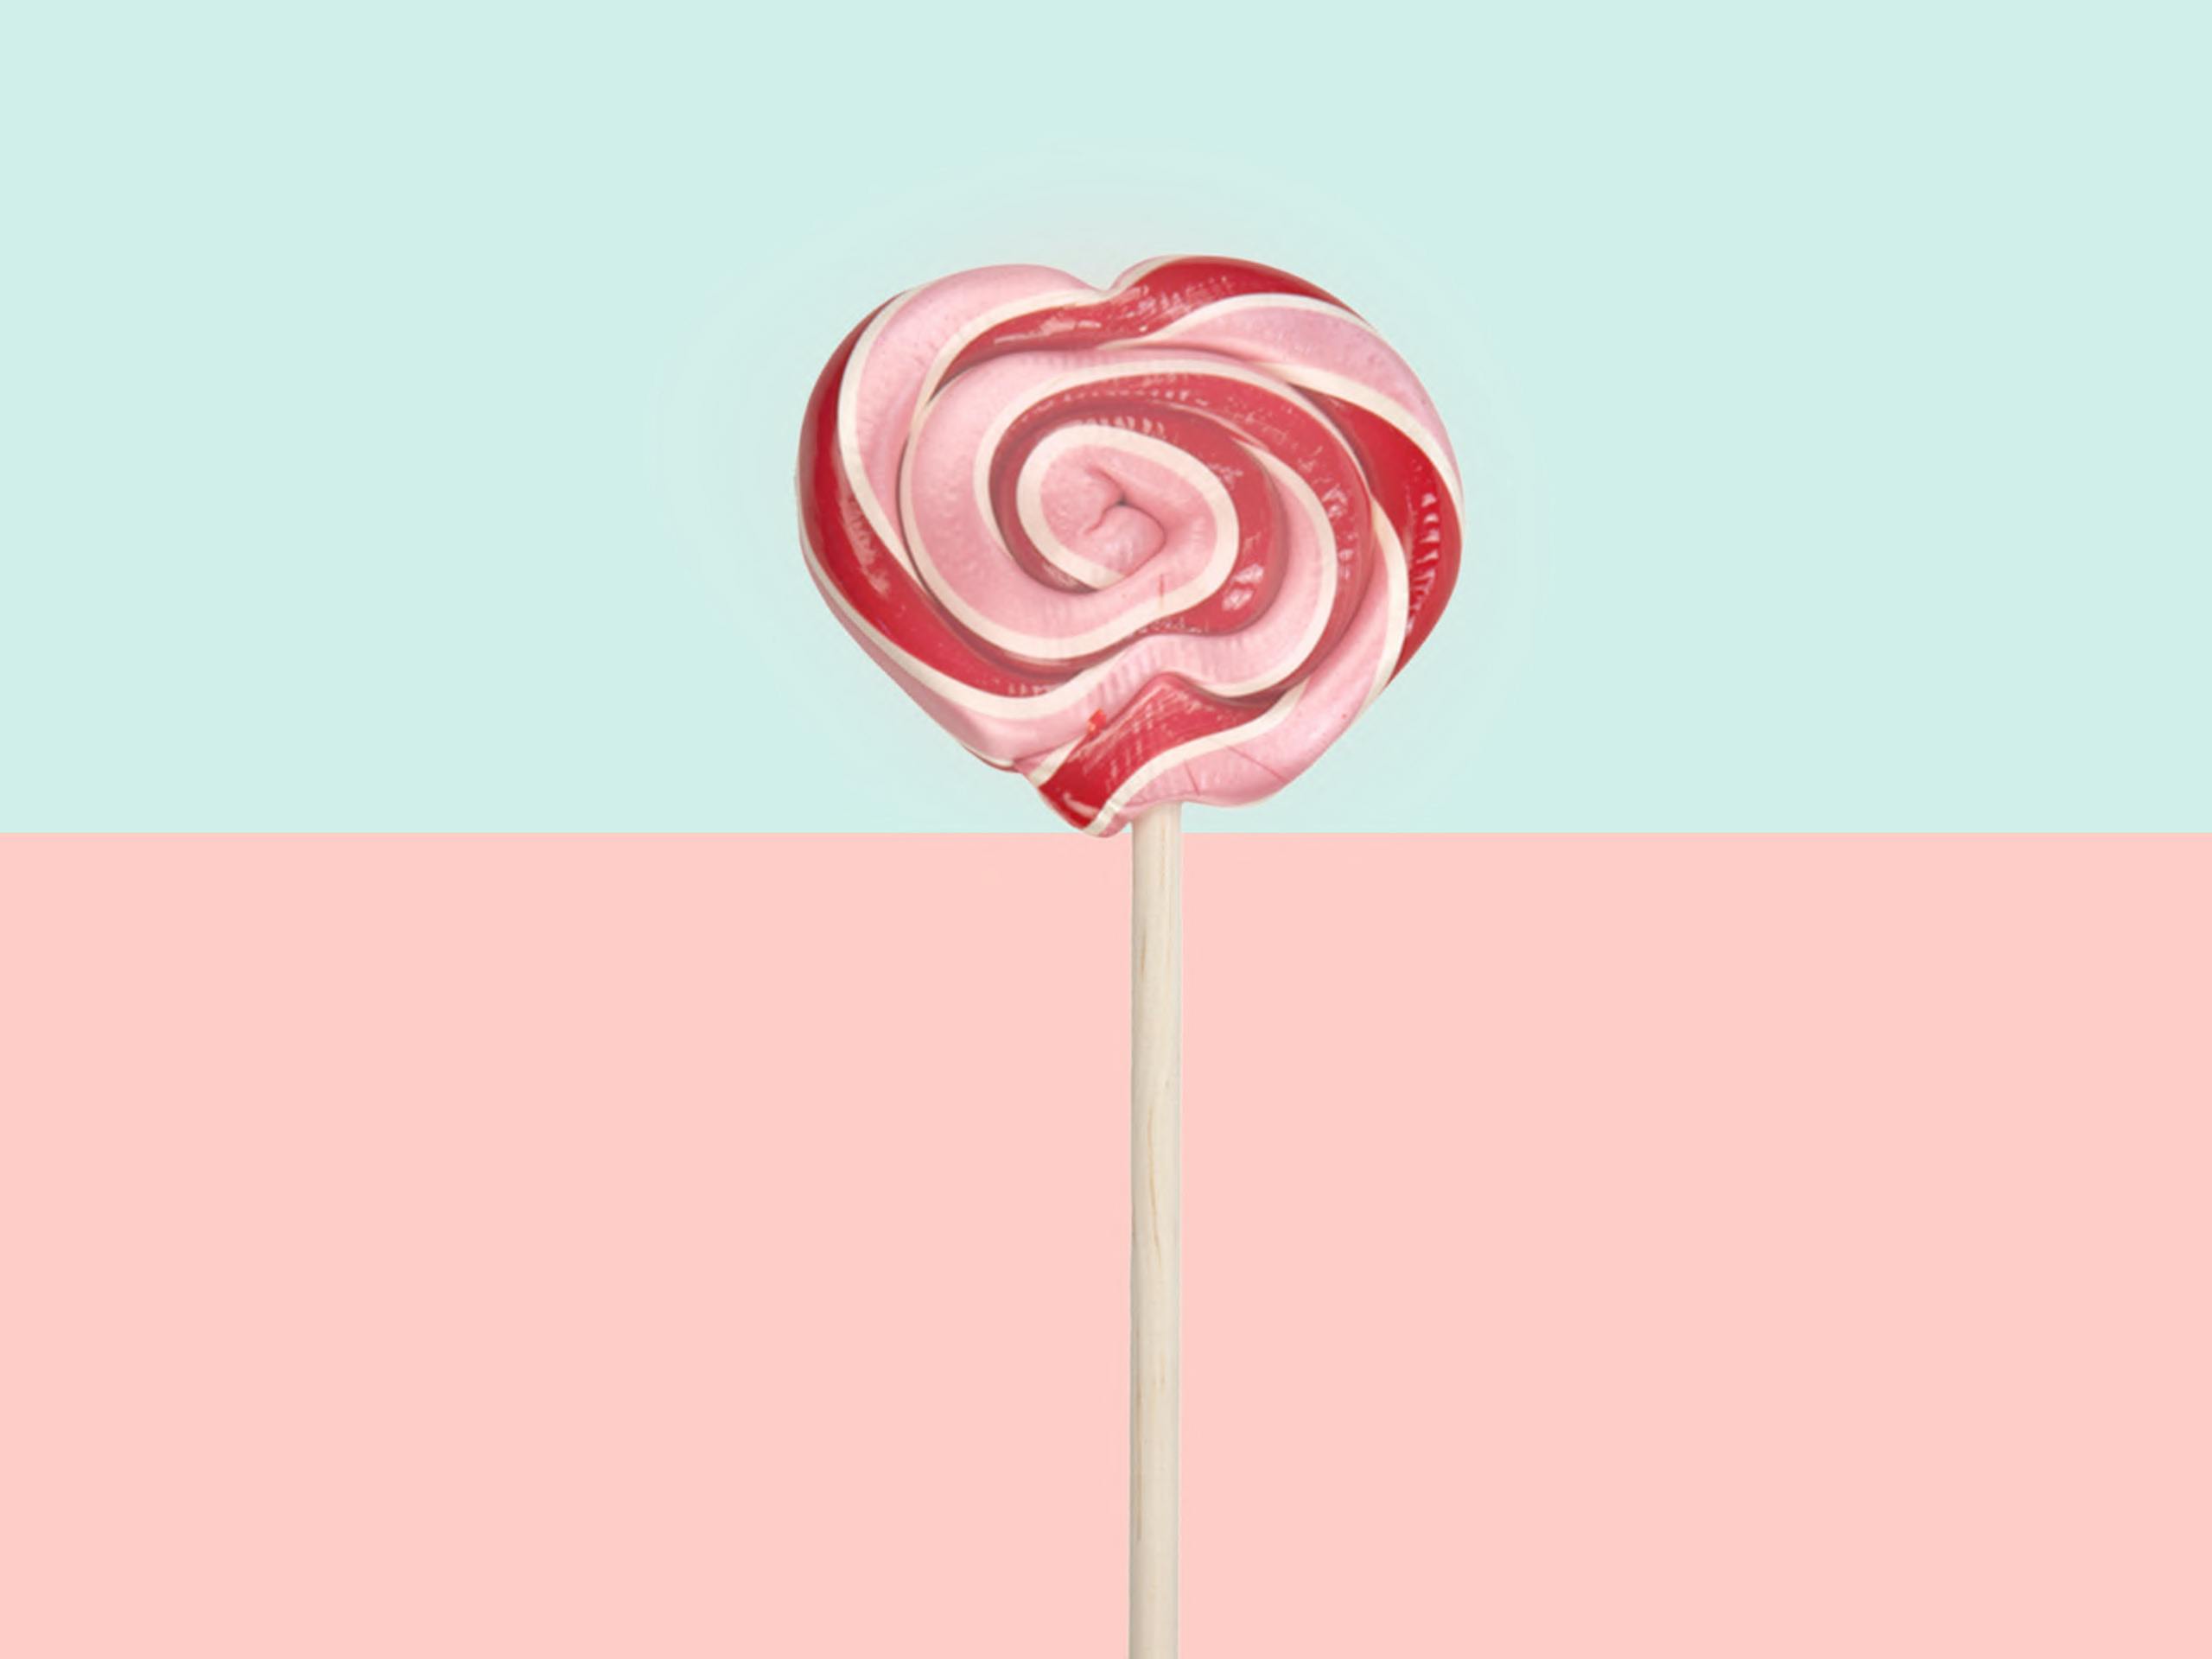 Lollipop Images  Free Photos PNG Stickers Wallpapers  Backgrounds   rawpixel